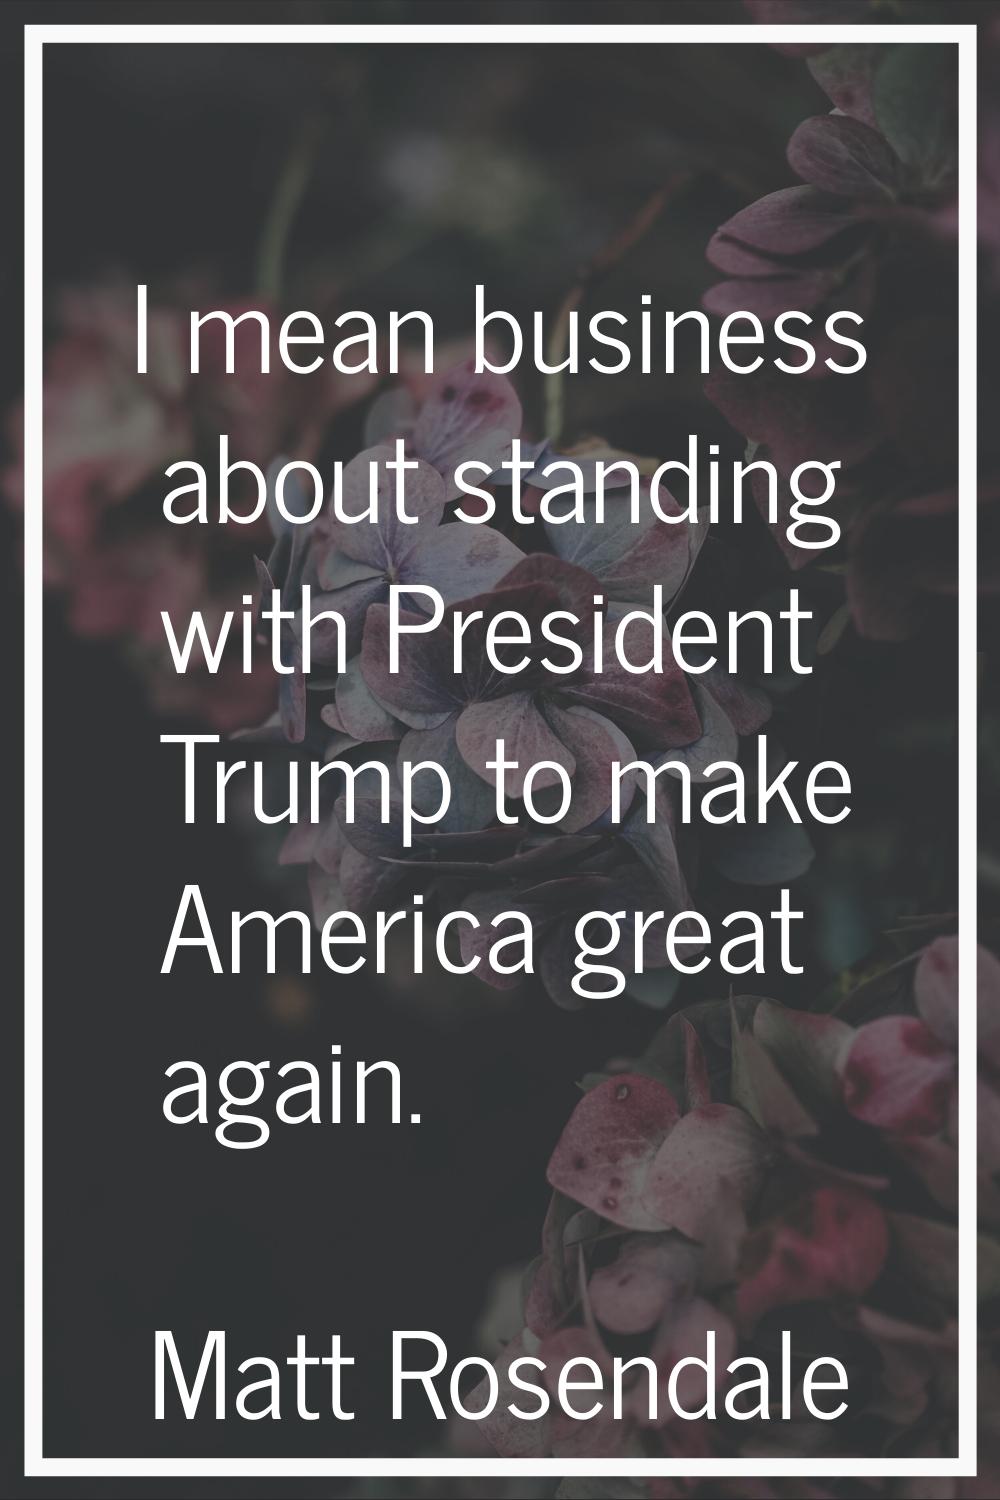 I mean business about standing with President Trump to make America great again.